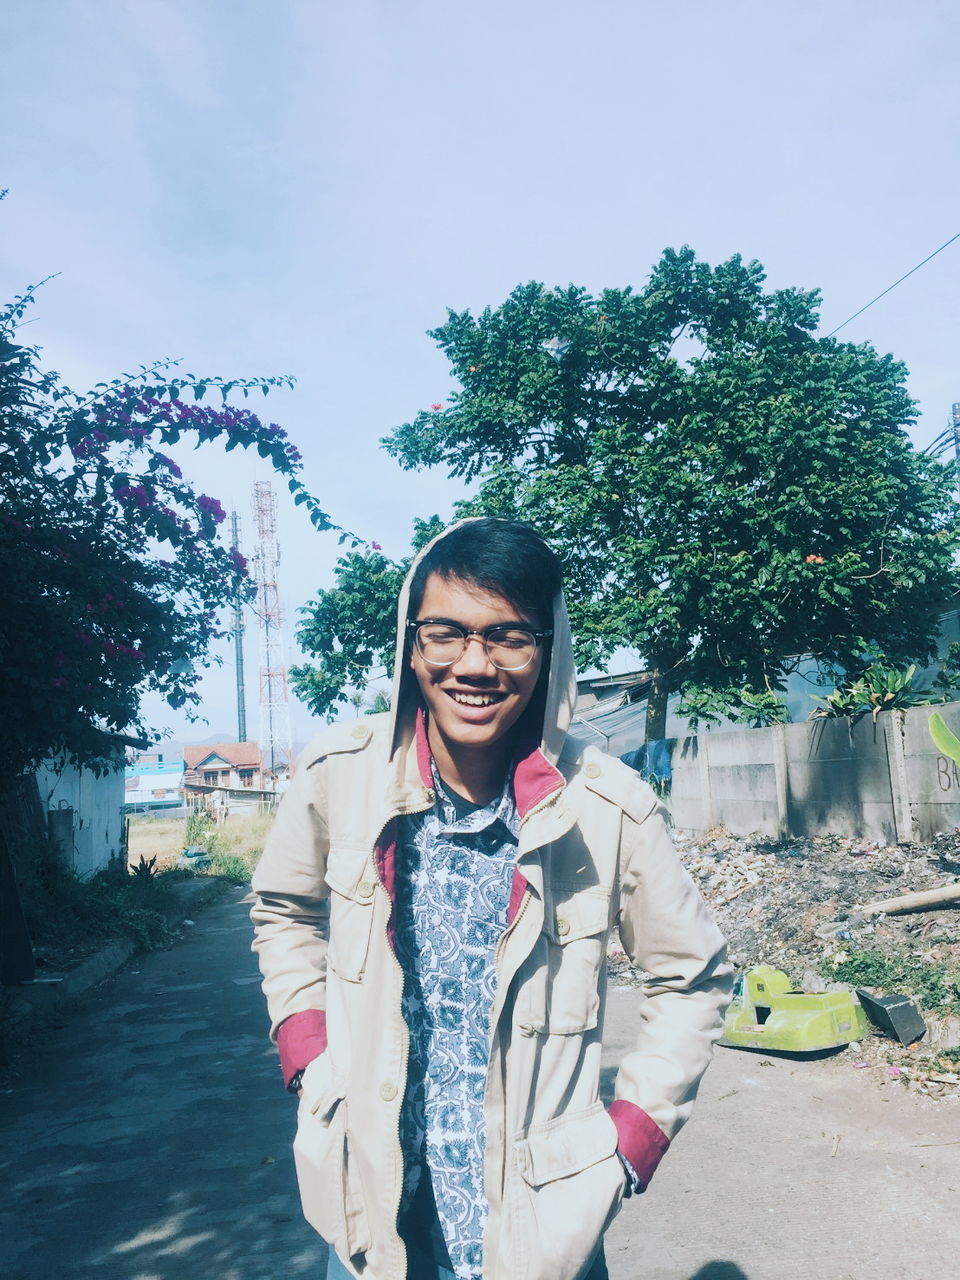 one person, smiling, happiness, young adult, front view, spring, portrait, blue, tree, adult, nature, looking at camera, emotion, plant, lifestyles, glasses, standing, leisure activity, teeth, smile, cheerful, day, sky, casual clothing, clothing, outdoors, city, fashion, women, eyeglasses, architecture, enjoyment, three quarter length, sunlight, fun, waist up, cool attitude, laughing, carefree